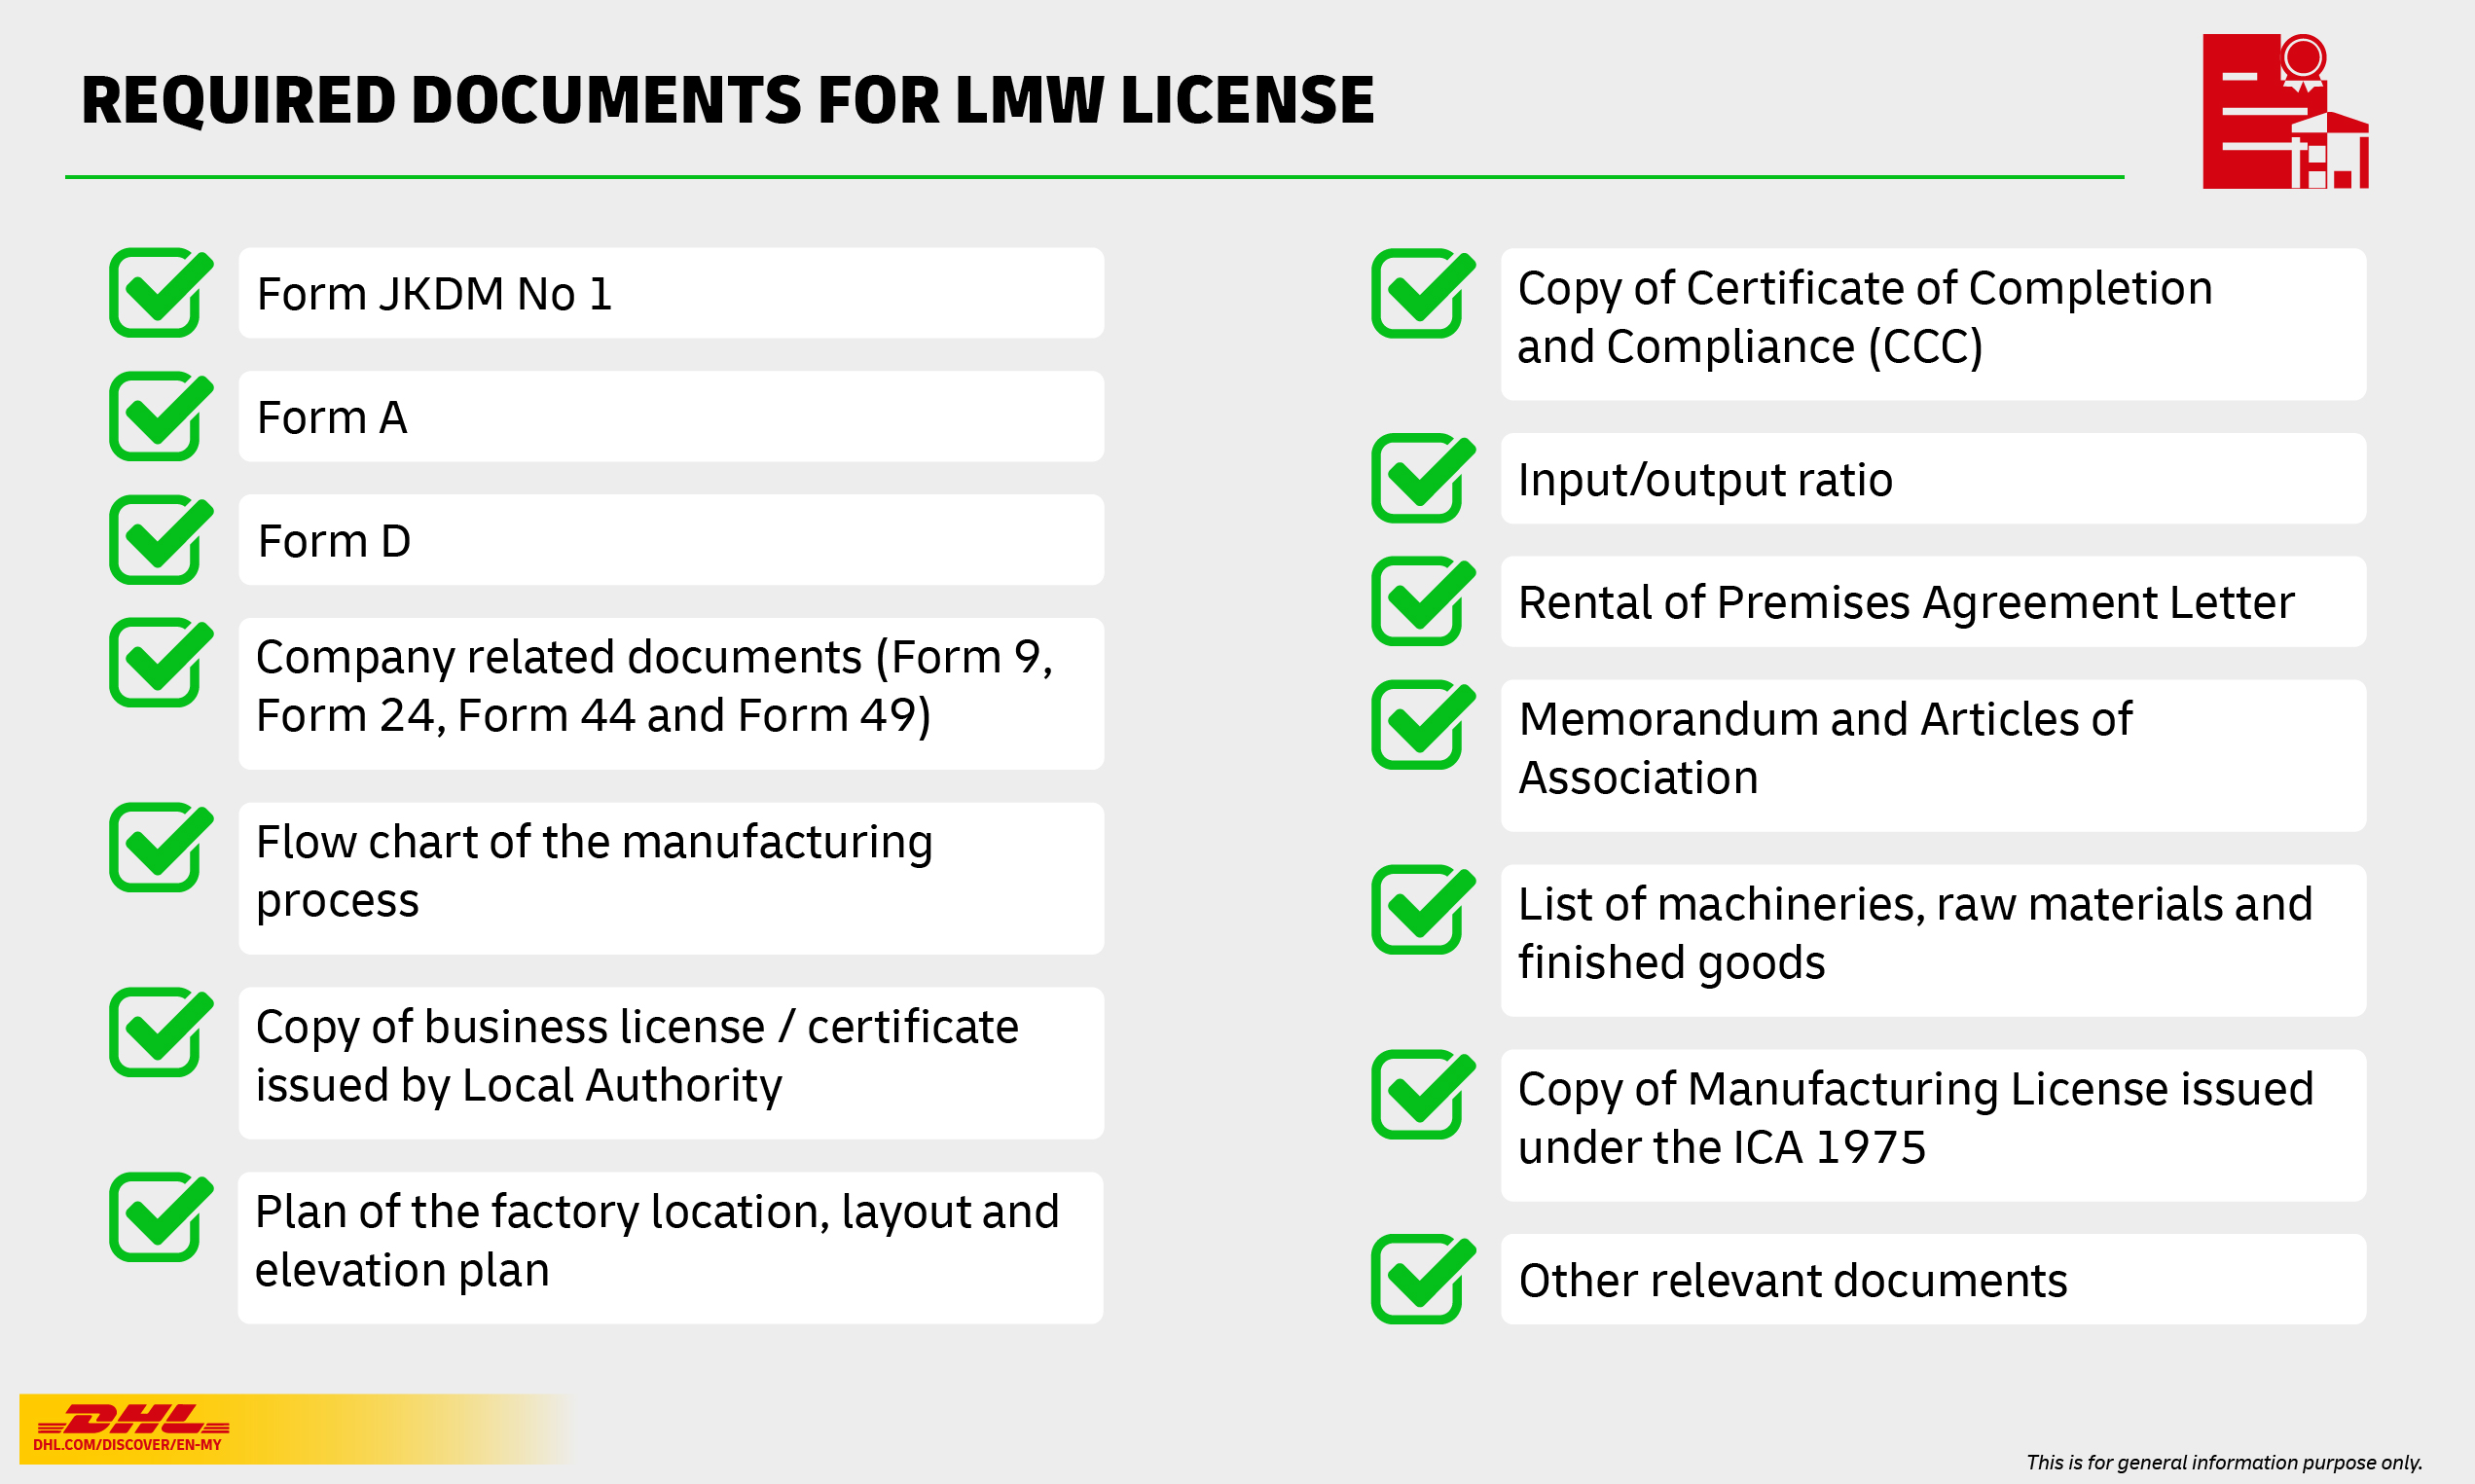 12 documents required to apply for LMW license